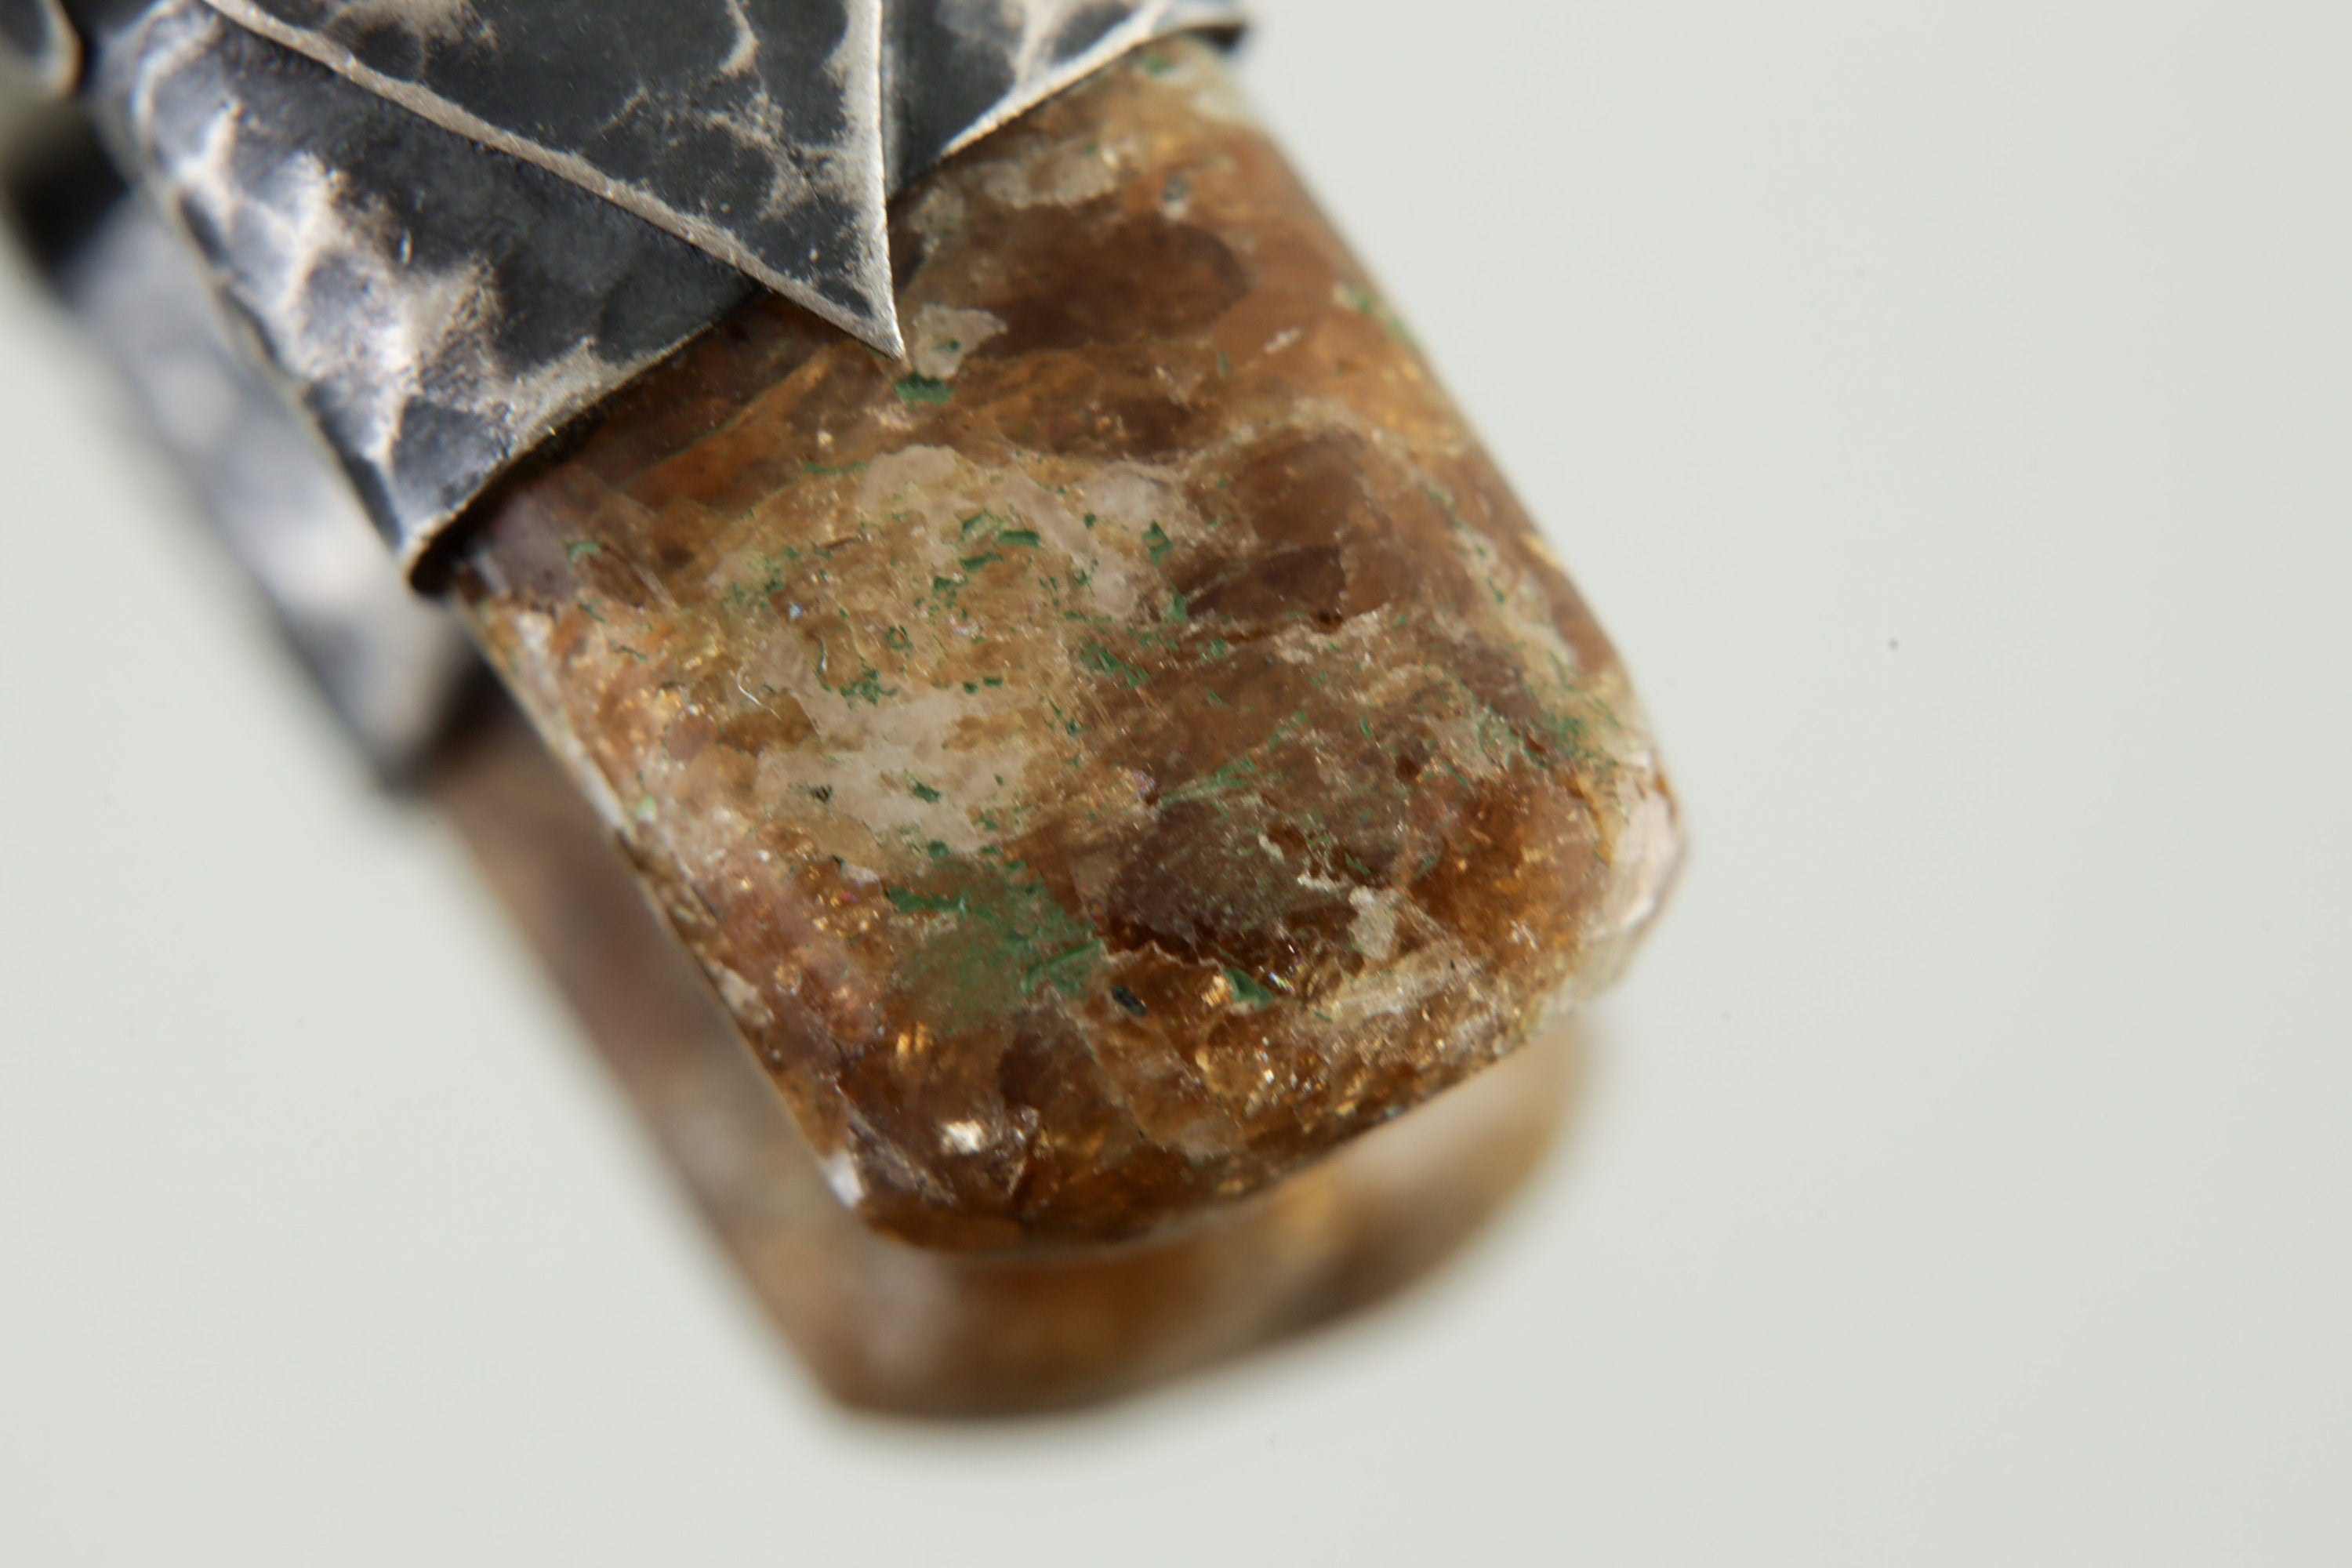 Polished Brown Himalayan Gem Dravite Tourmaline Specimen Pendant Stack Collection Charm Organic Textured Sterling Silver Crystal Necklace